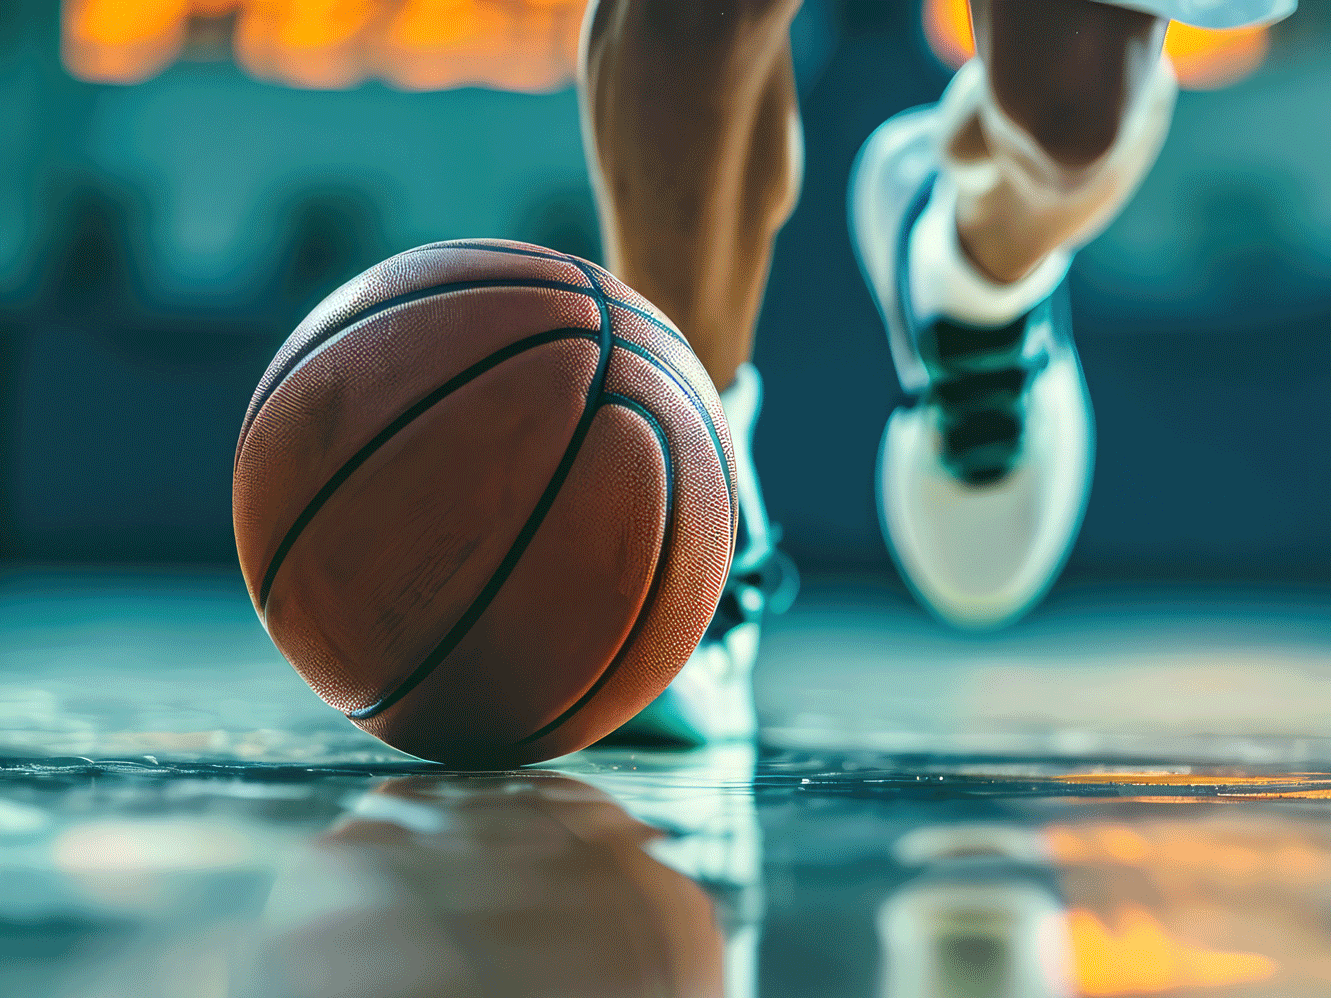 R&D tax incentives: Customised basketball shoe not eligible